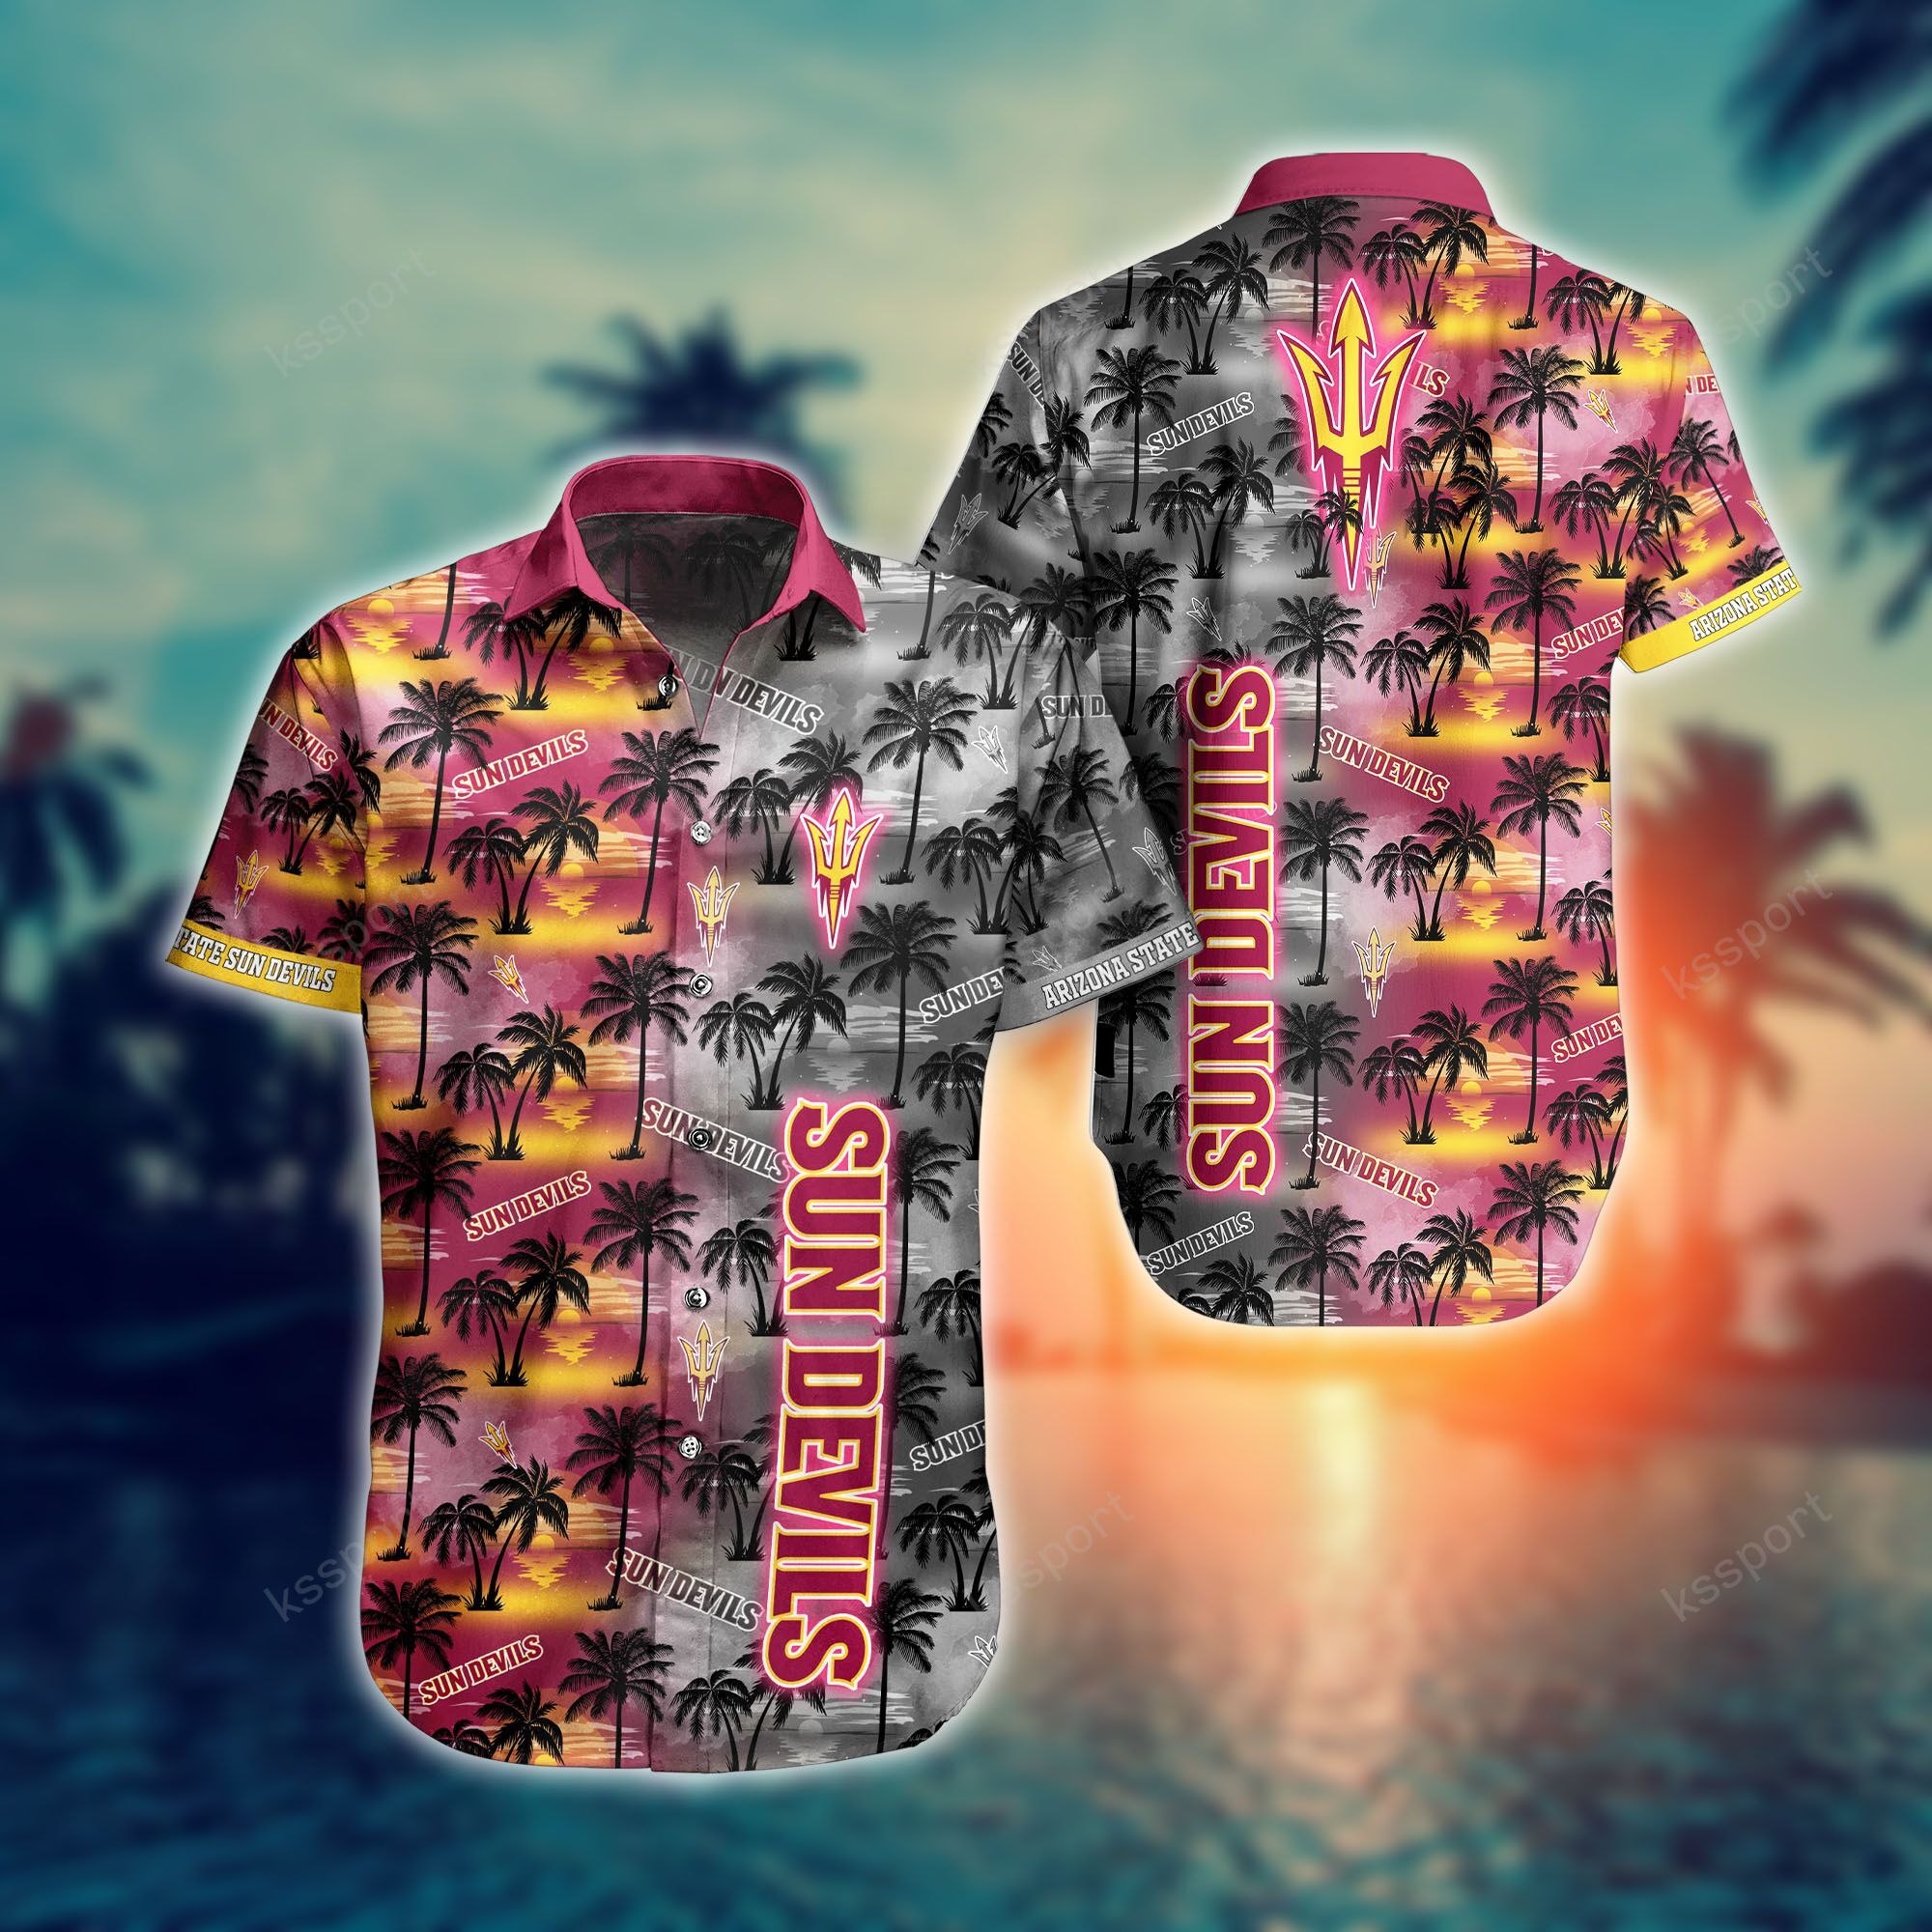 Treat yourself to a cool Hawaiian set today! 5